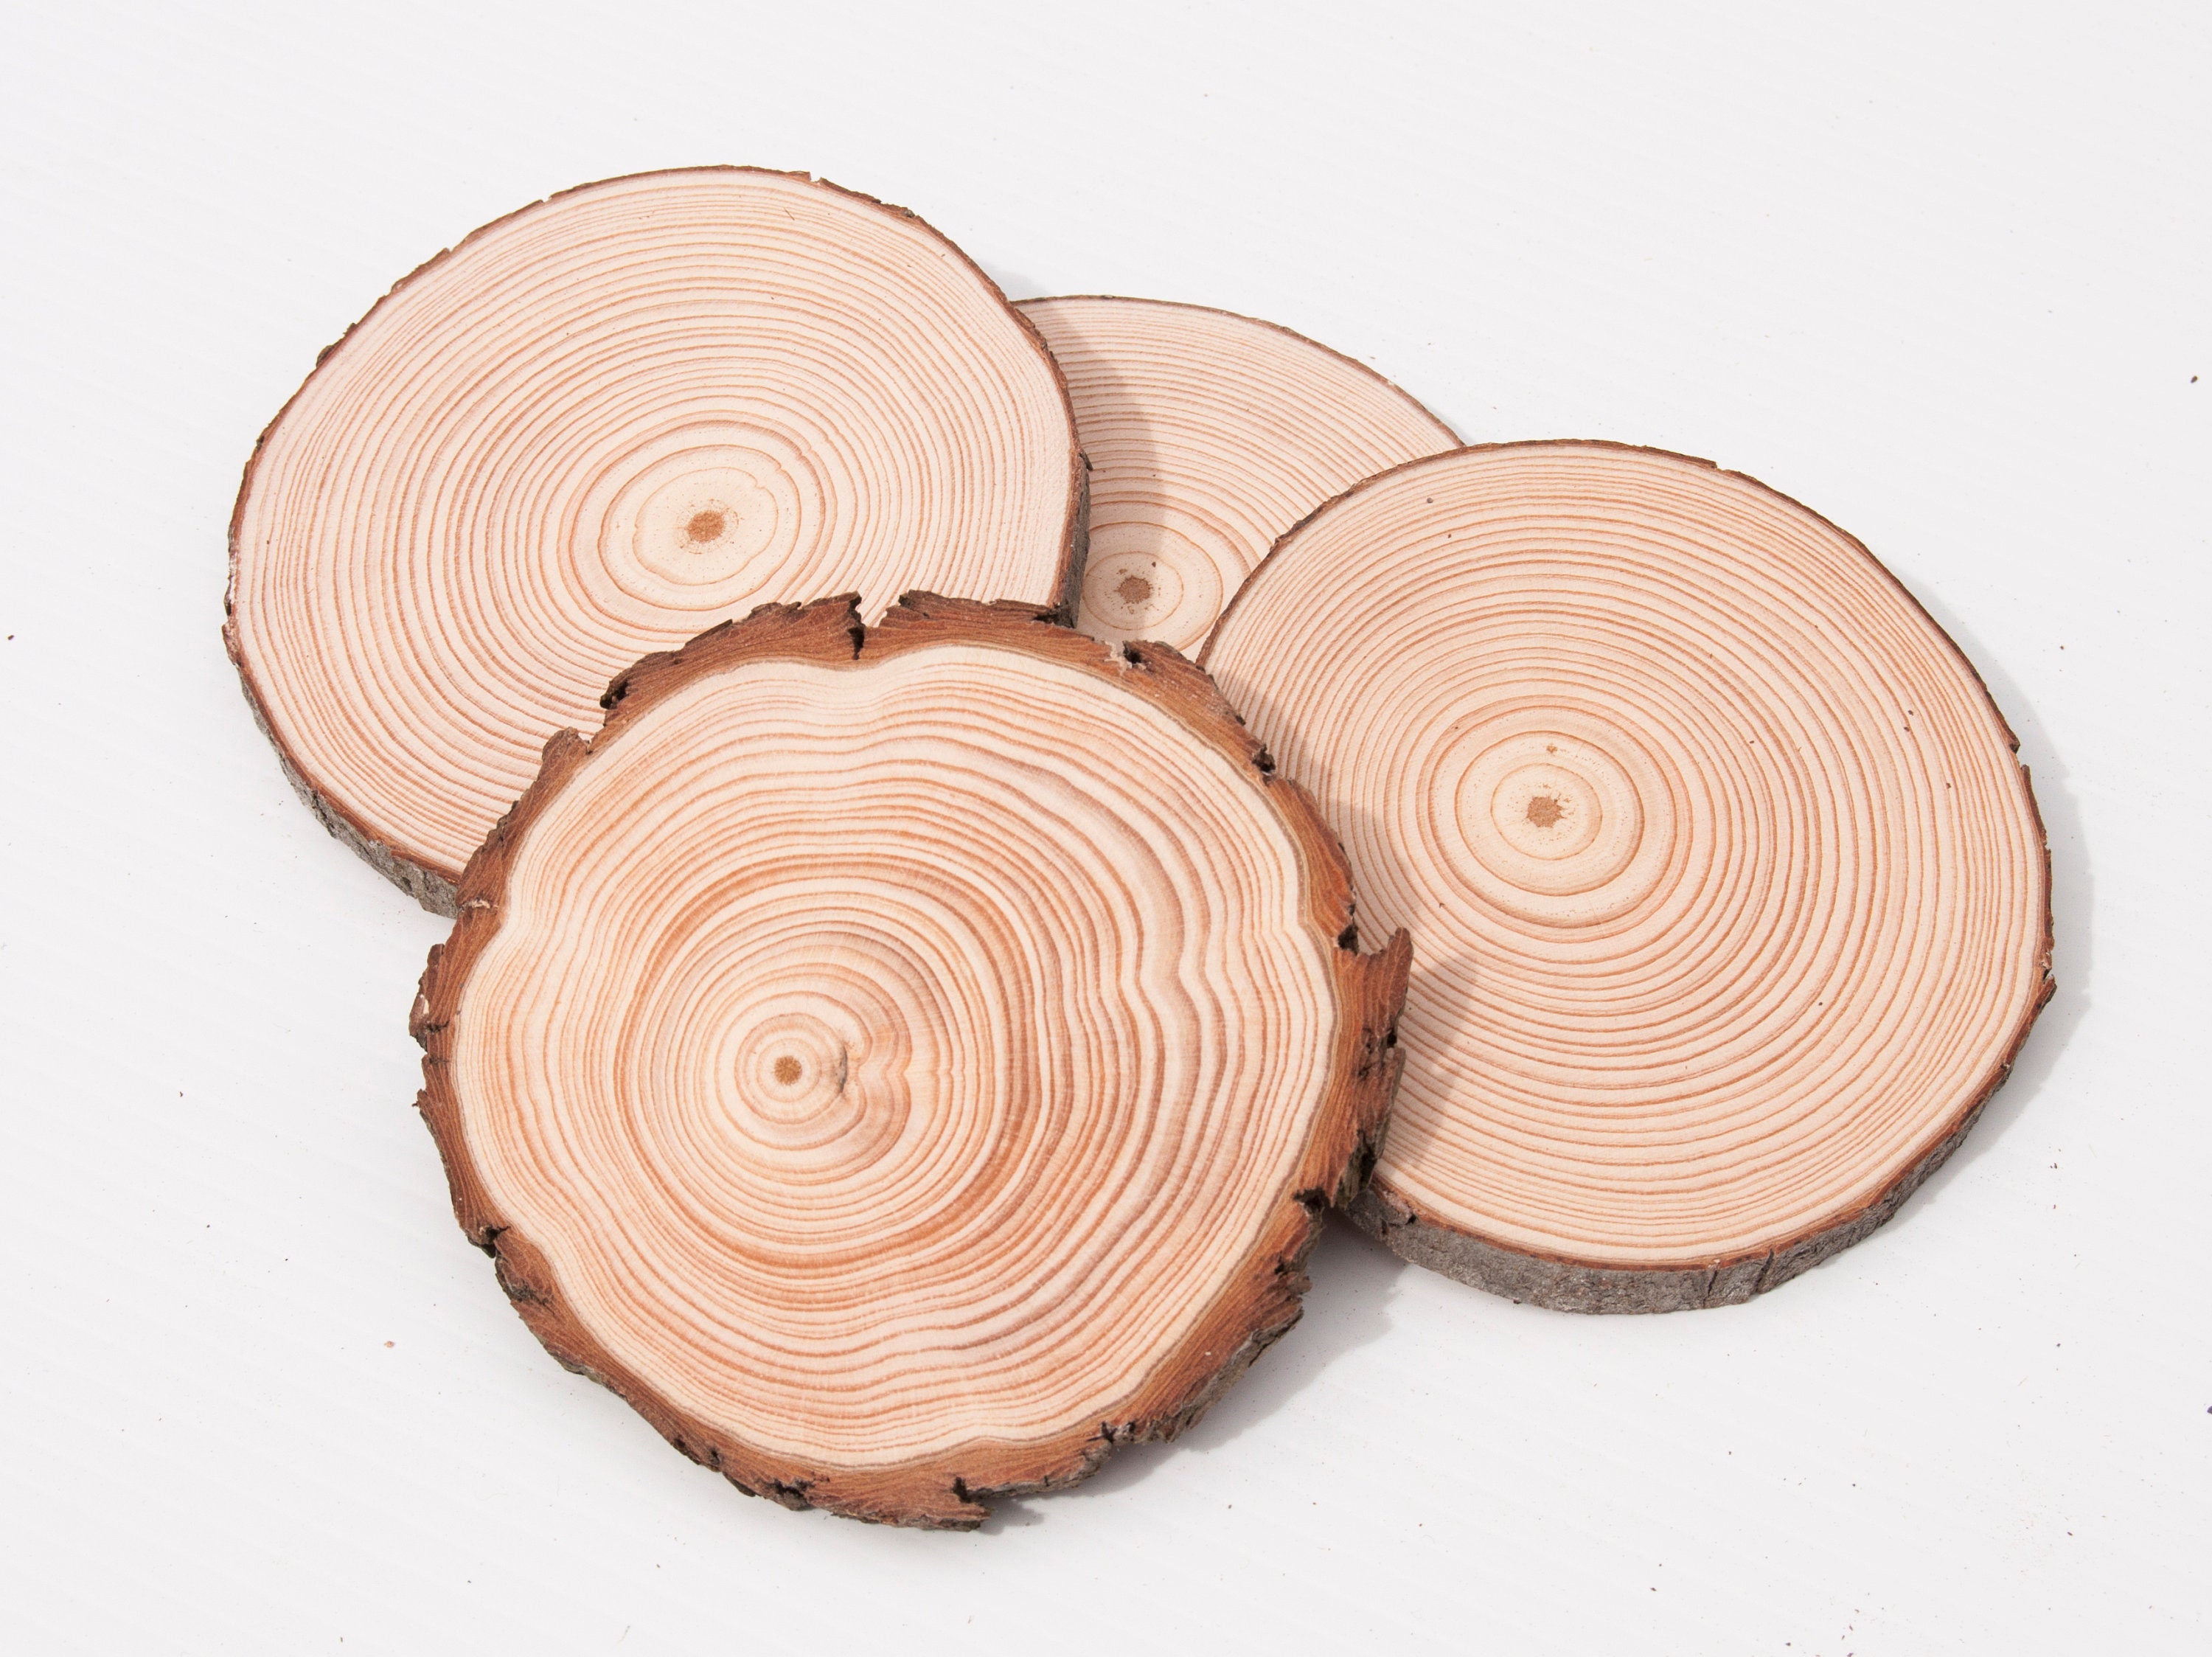 Natural Wood Slices Rustic Wood Rounds for Hobby Crafts Ornaments Weddings  or Home Decor Blank Tree Slices 6pcs 